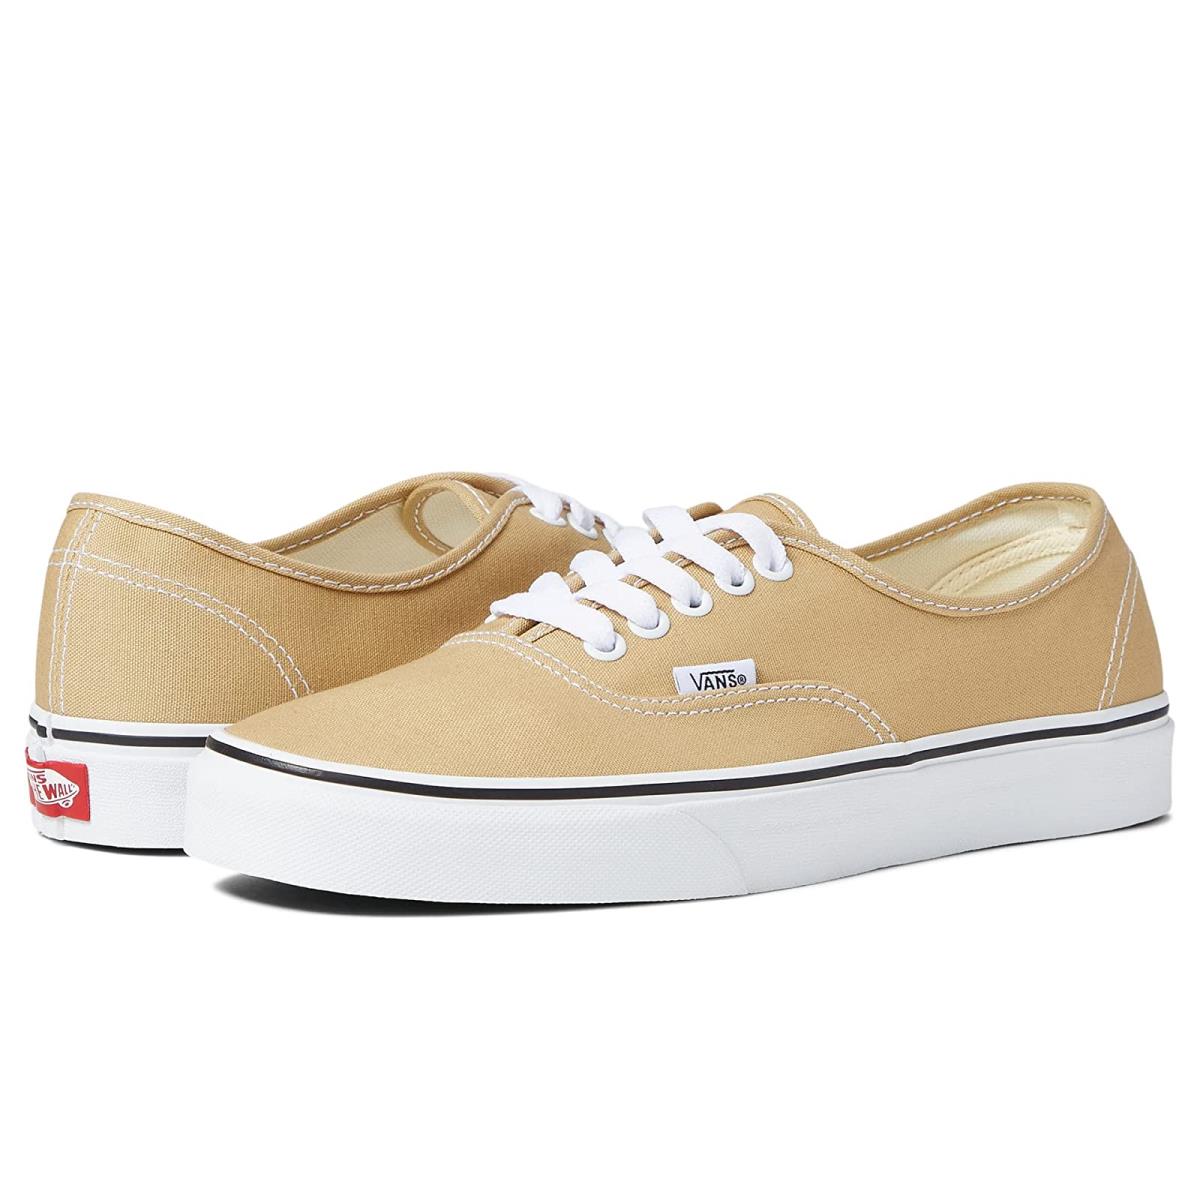 Unisex Sneakers Athletic Shoes Vans Taos Taupe